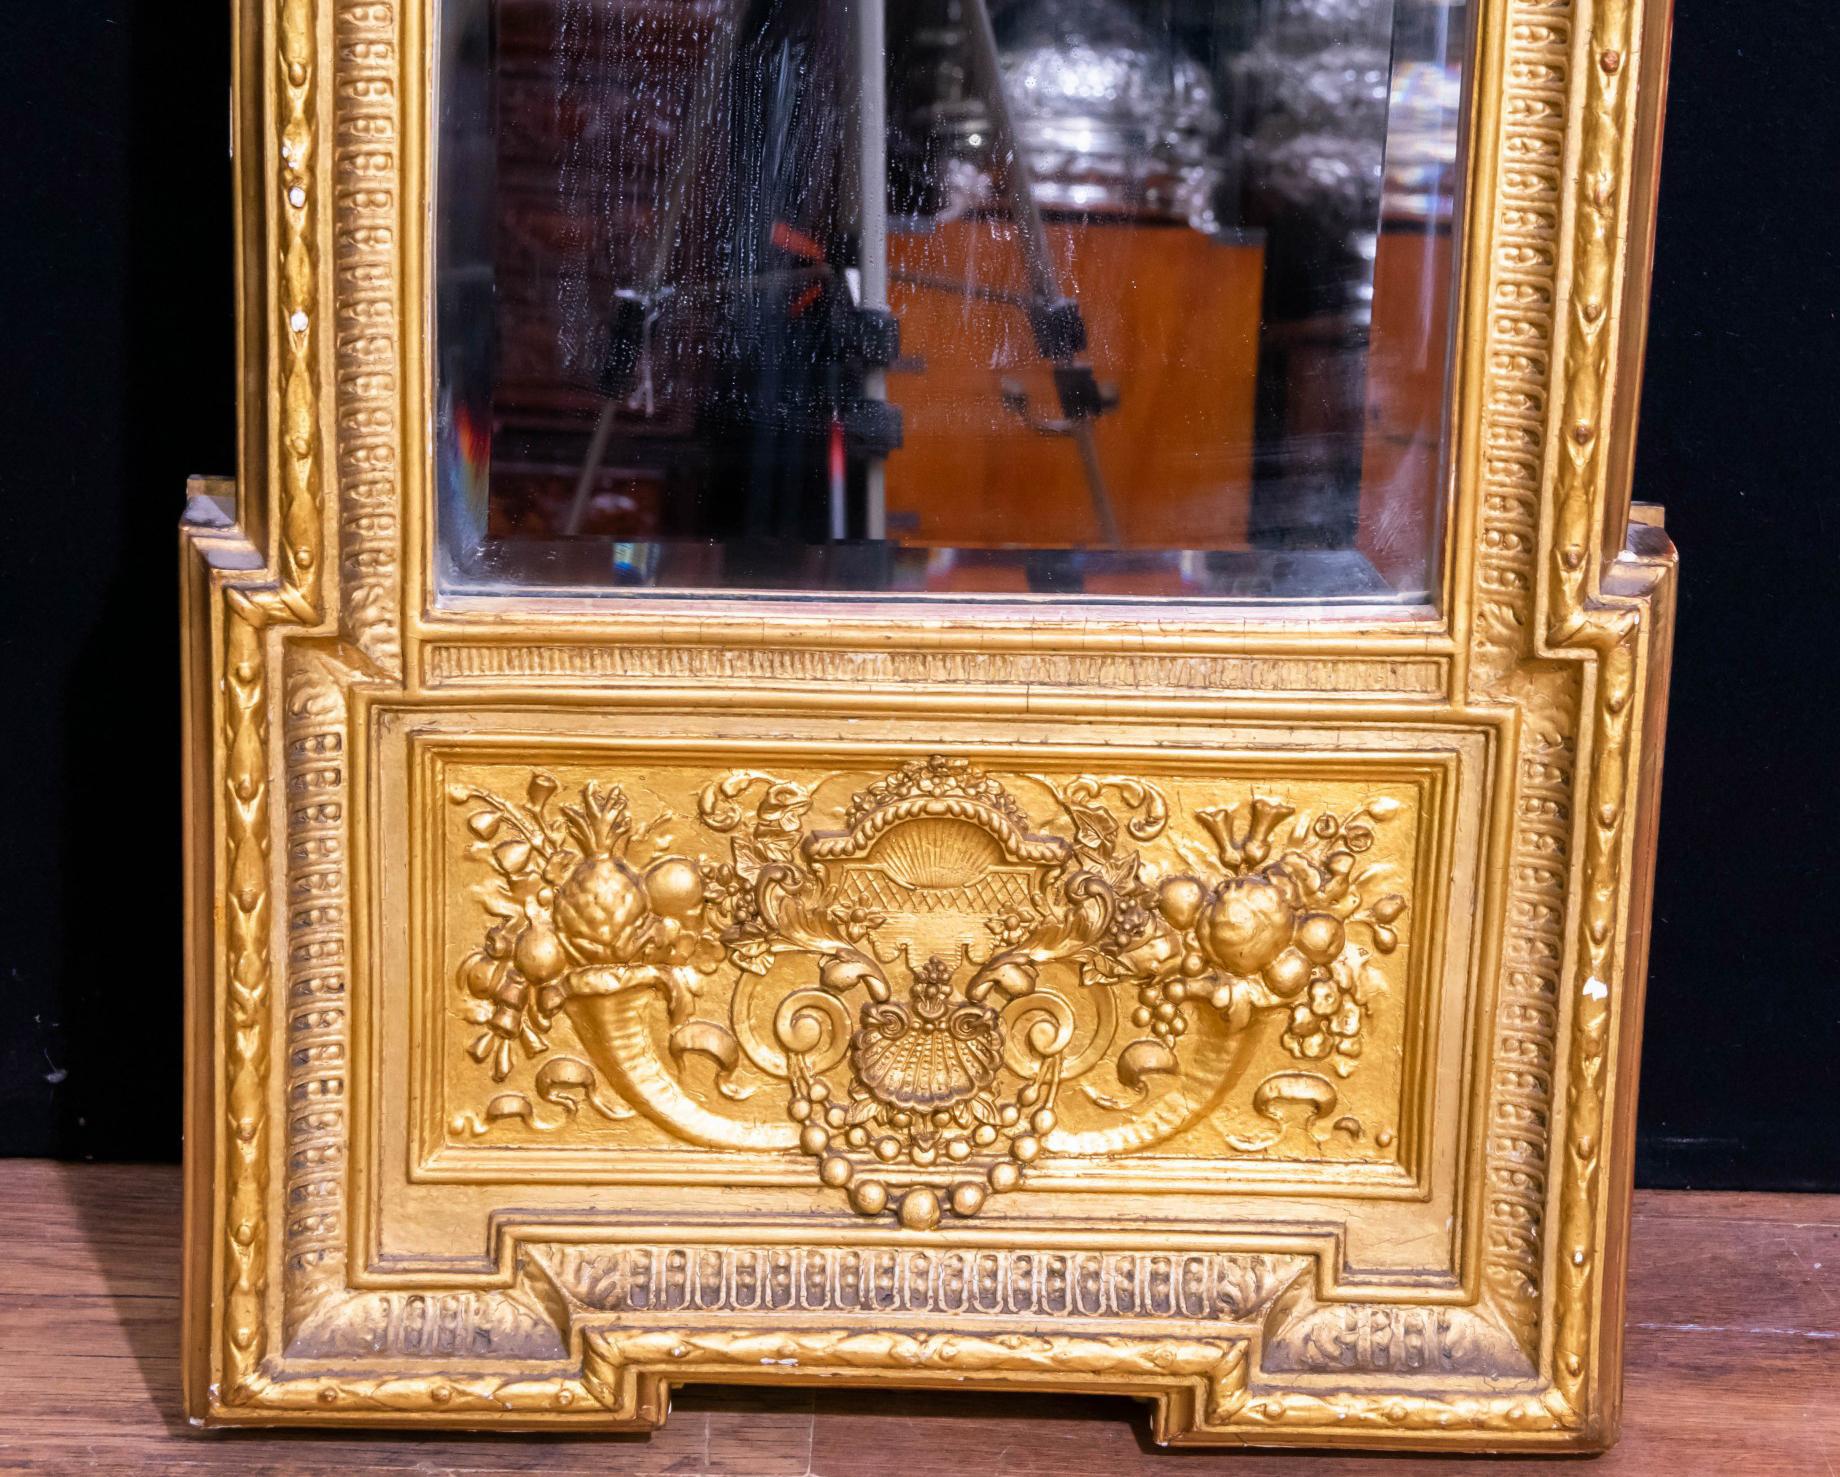 - Gorgeous antique French Empire pier mirror
- Hand carved frame adorned with cherubs
- Please let us know if you would like to view this piece in our Canonbury Antiques Herts showroom, just 25 minutes north of London 
- Offered in great shape